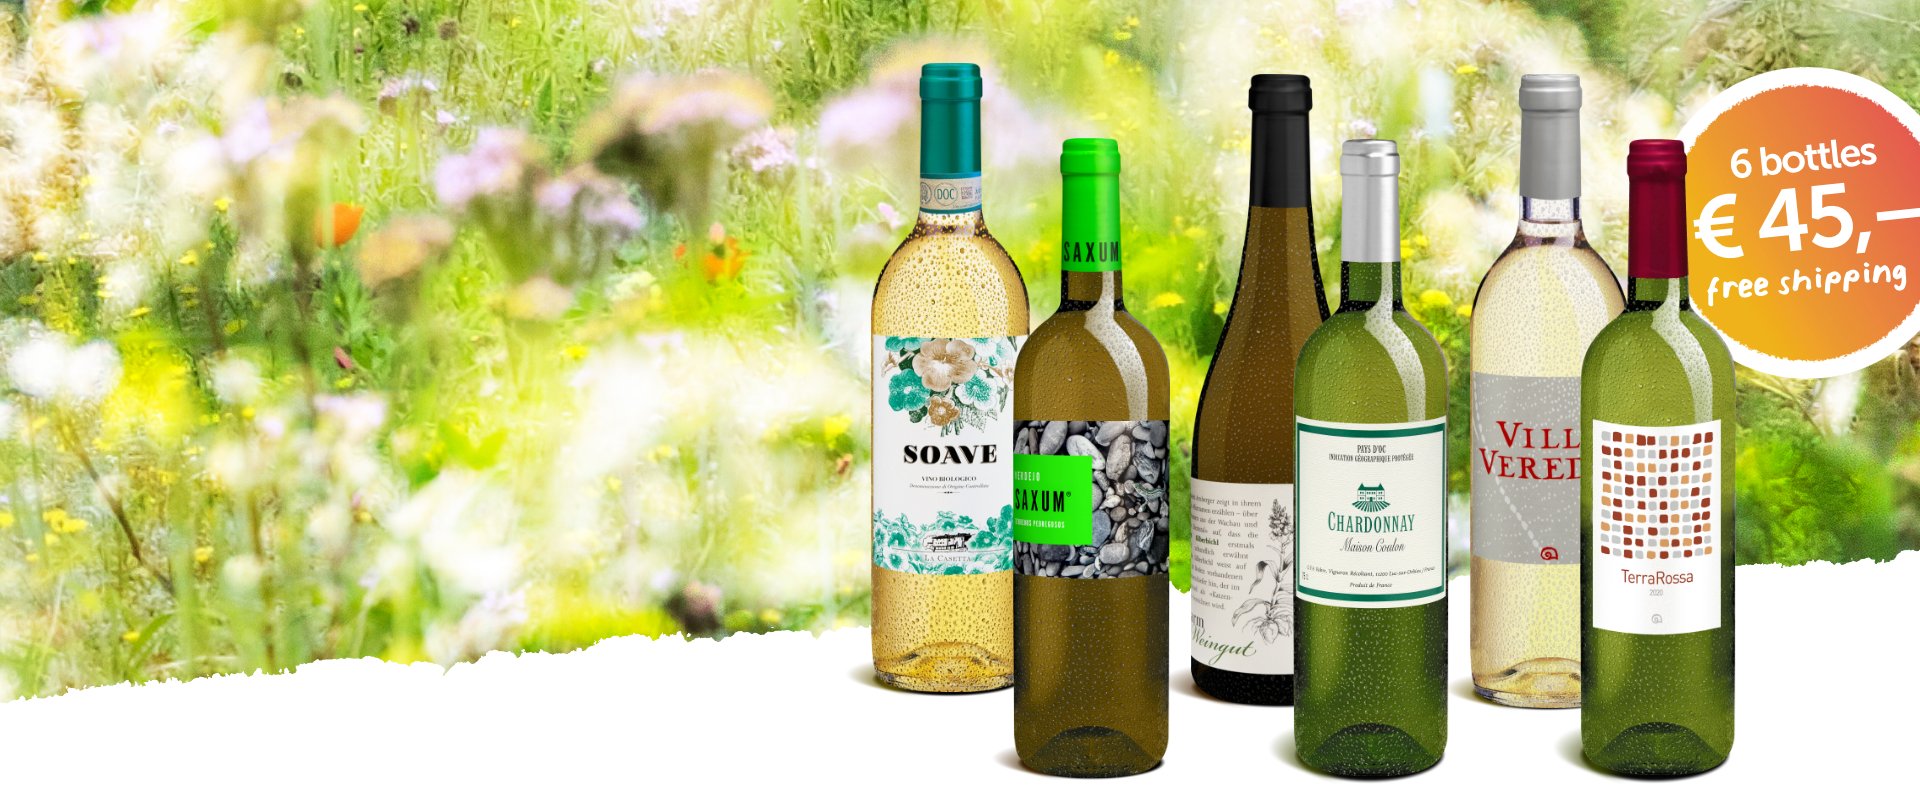 Delinat - Wines from nature's richness